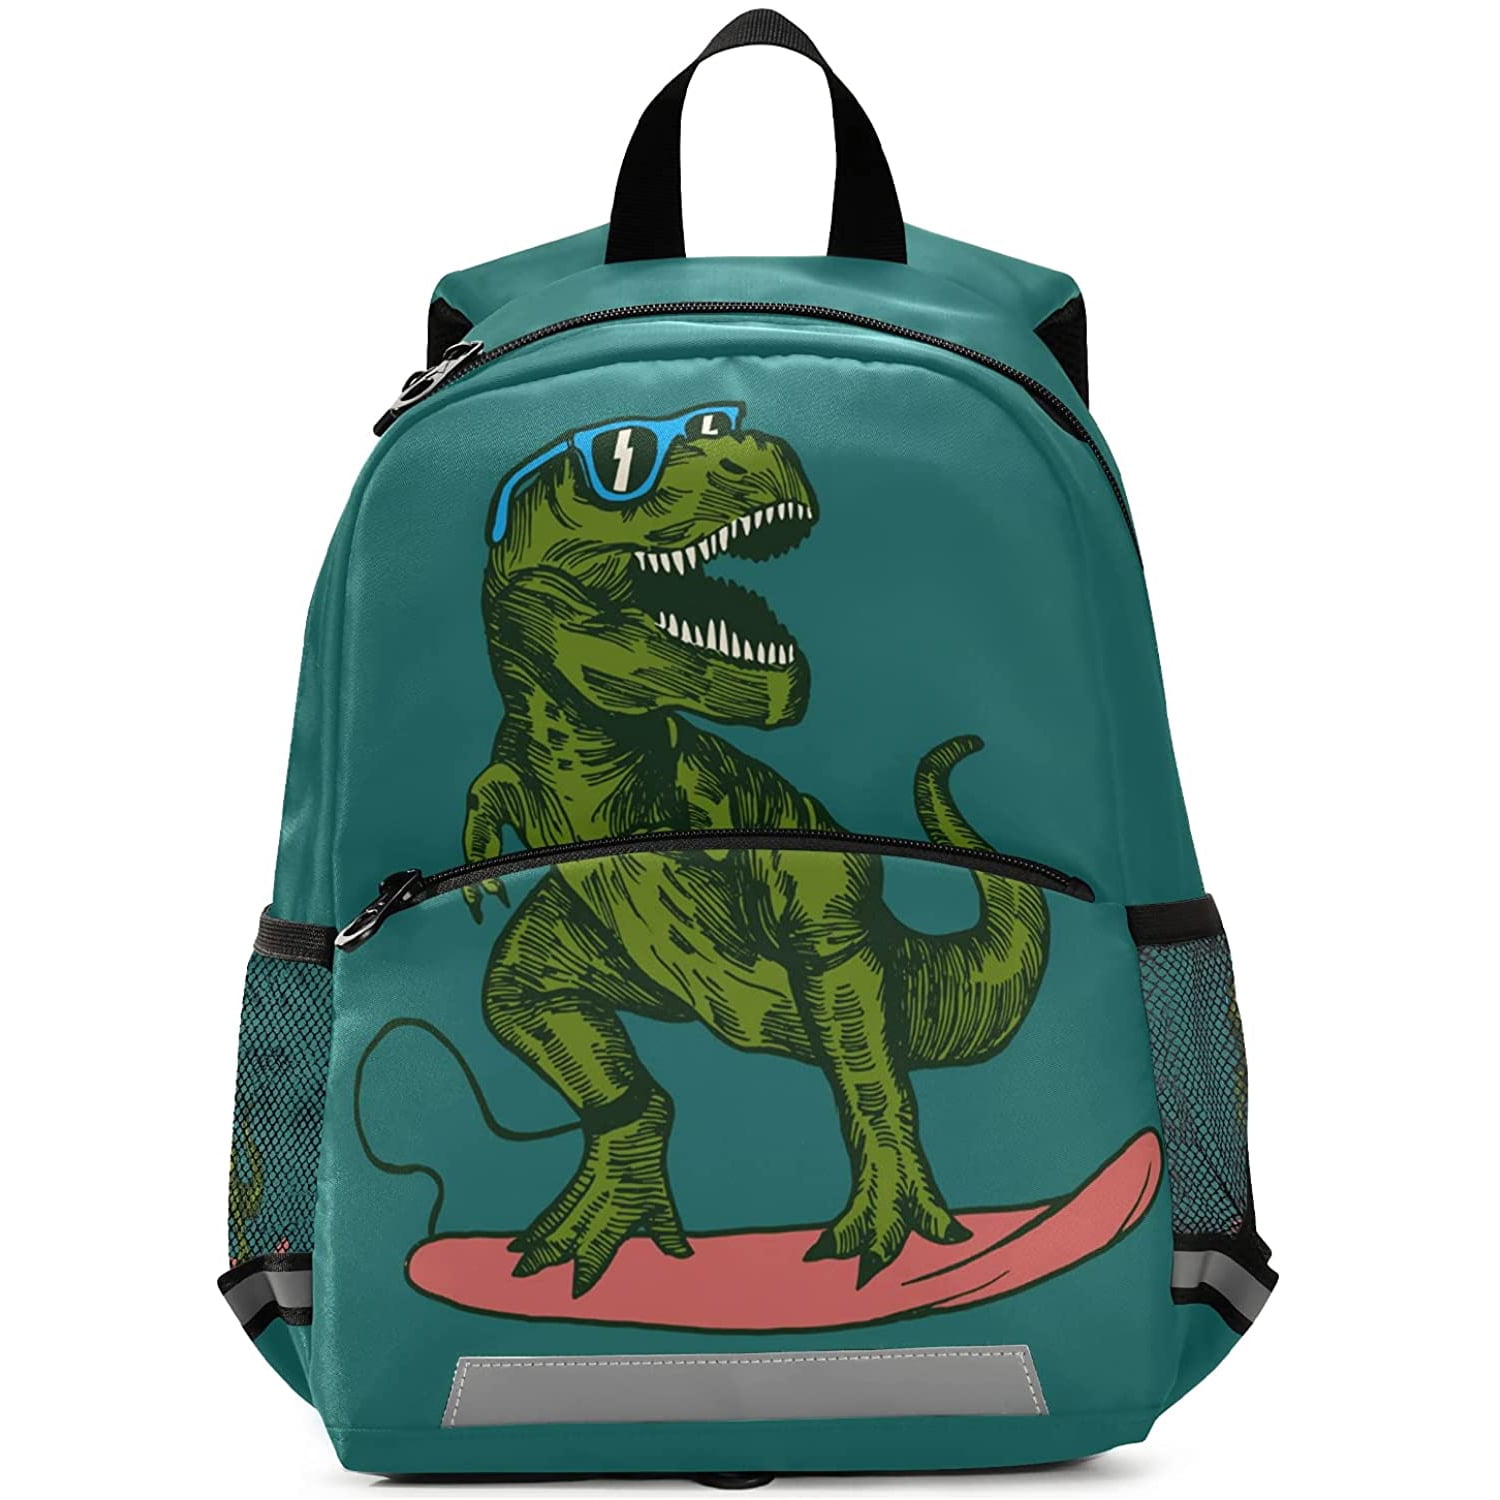 Boys' Backpack Dinosaur Pattern Cartoon Bookbag For 2-6 Year Old Kids, With  Anti-lost Buckle